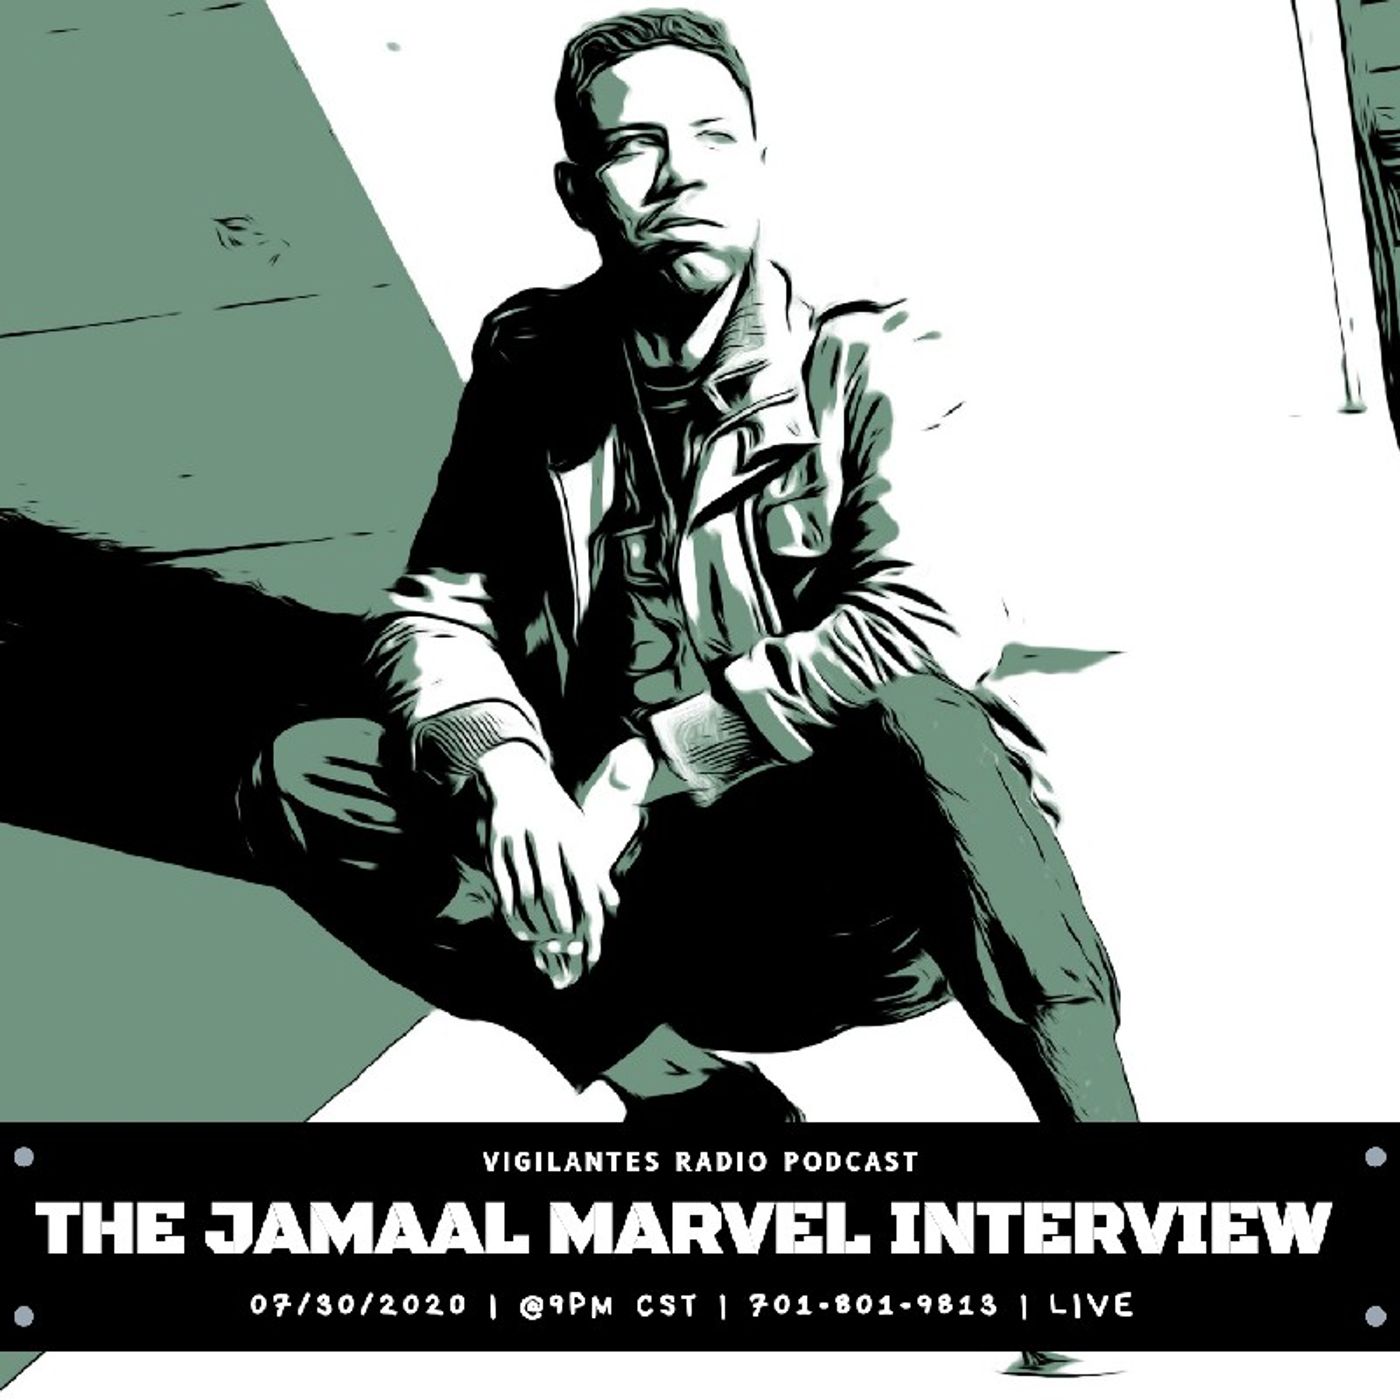 The Jamaal Marvel Interview. Image